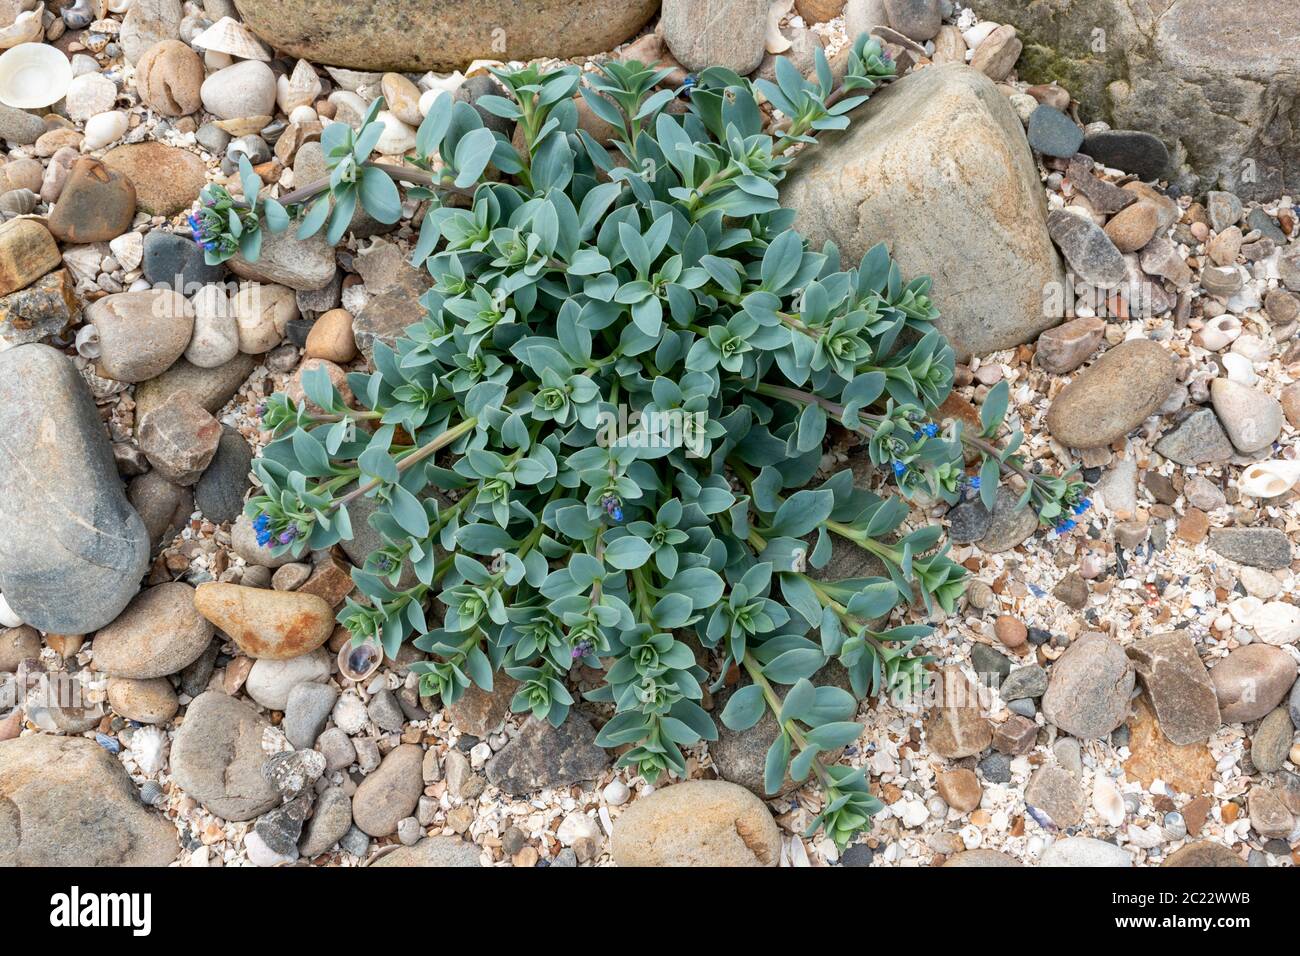 OYSTERPLANT Mertensia maritima A BLUE GREEN PLANT WITH BRIGHT BLUE FLOWERS ON A SEASHELL AND ROCK BEACH OF THE MORAY COAST SCOTLAND Stock Photo